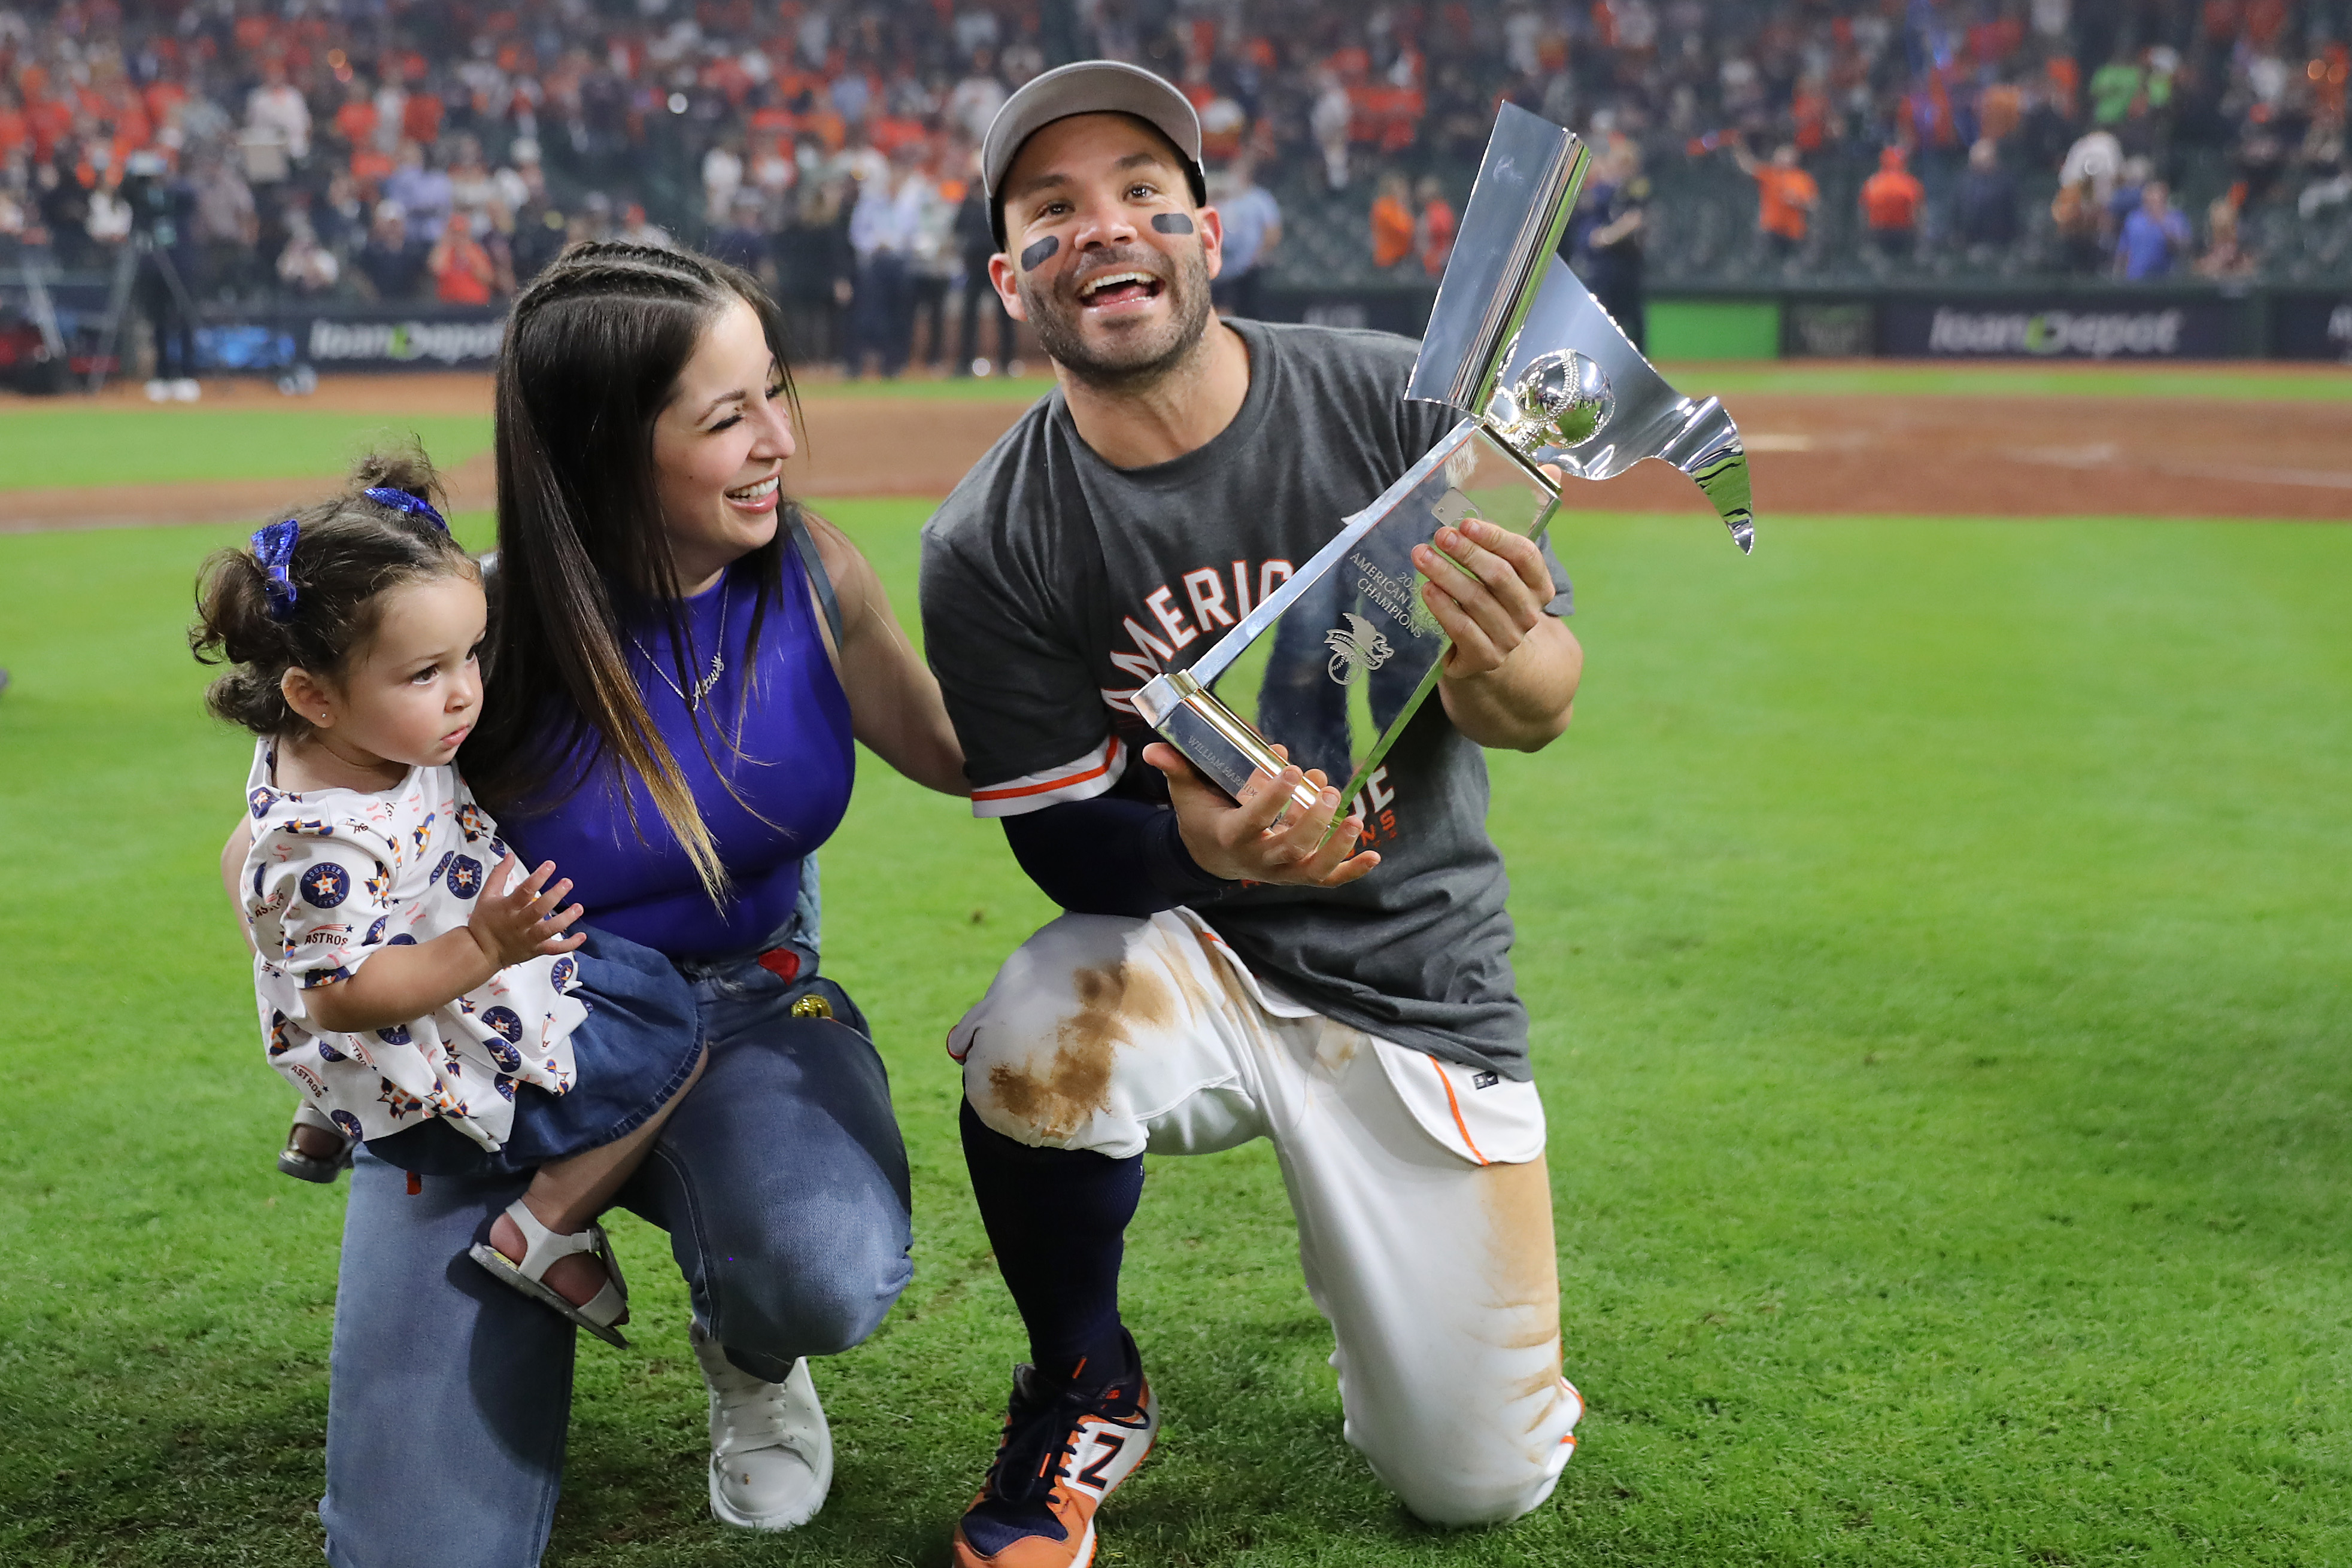 Jose Altuve poses with his wife, Nina Altuve, and his daughter Melanie Altuve during the American League Championship Series at Minute Maid Park on October 22, 2021, in Houston, Texas. | Source: Getty Images